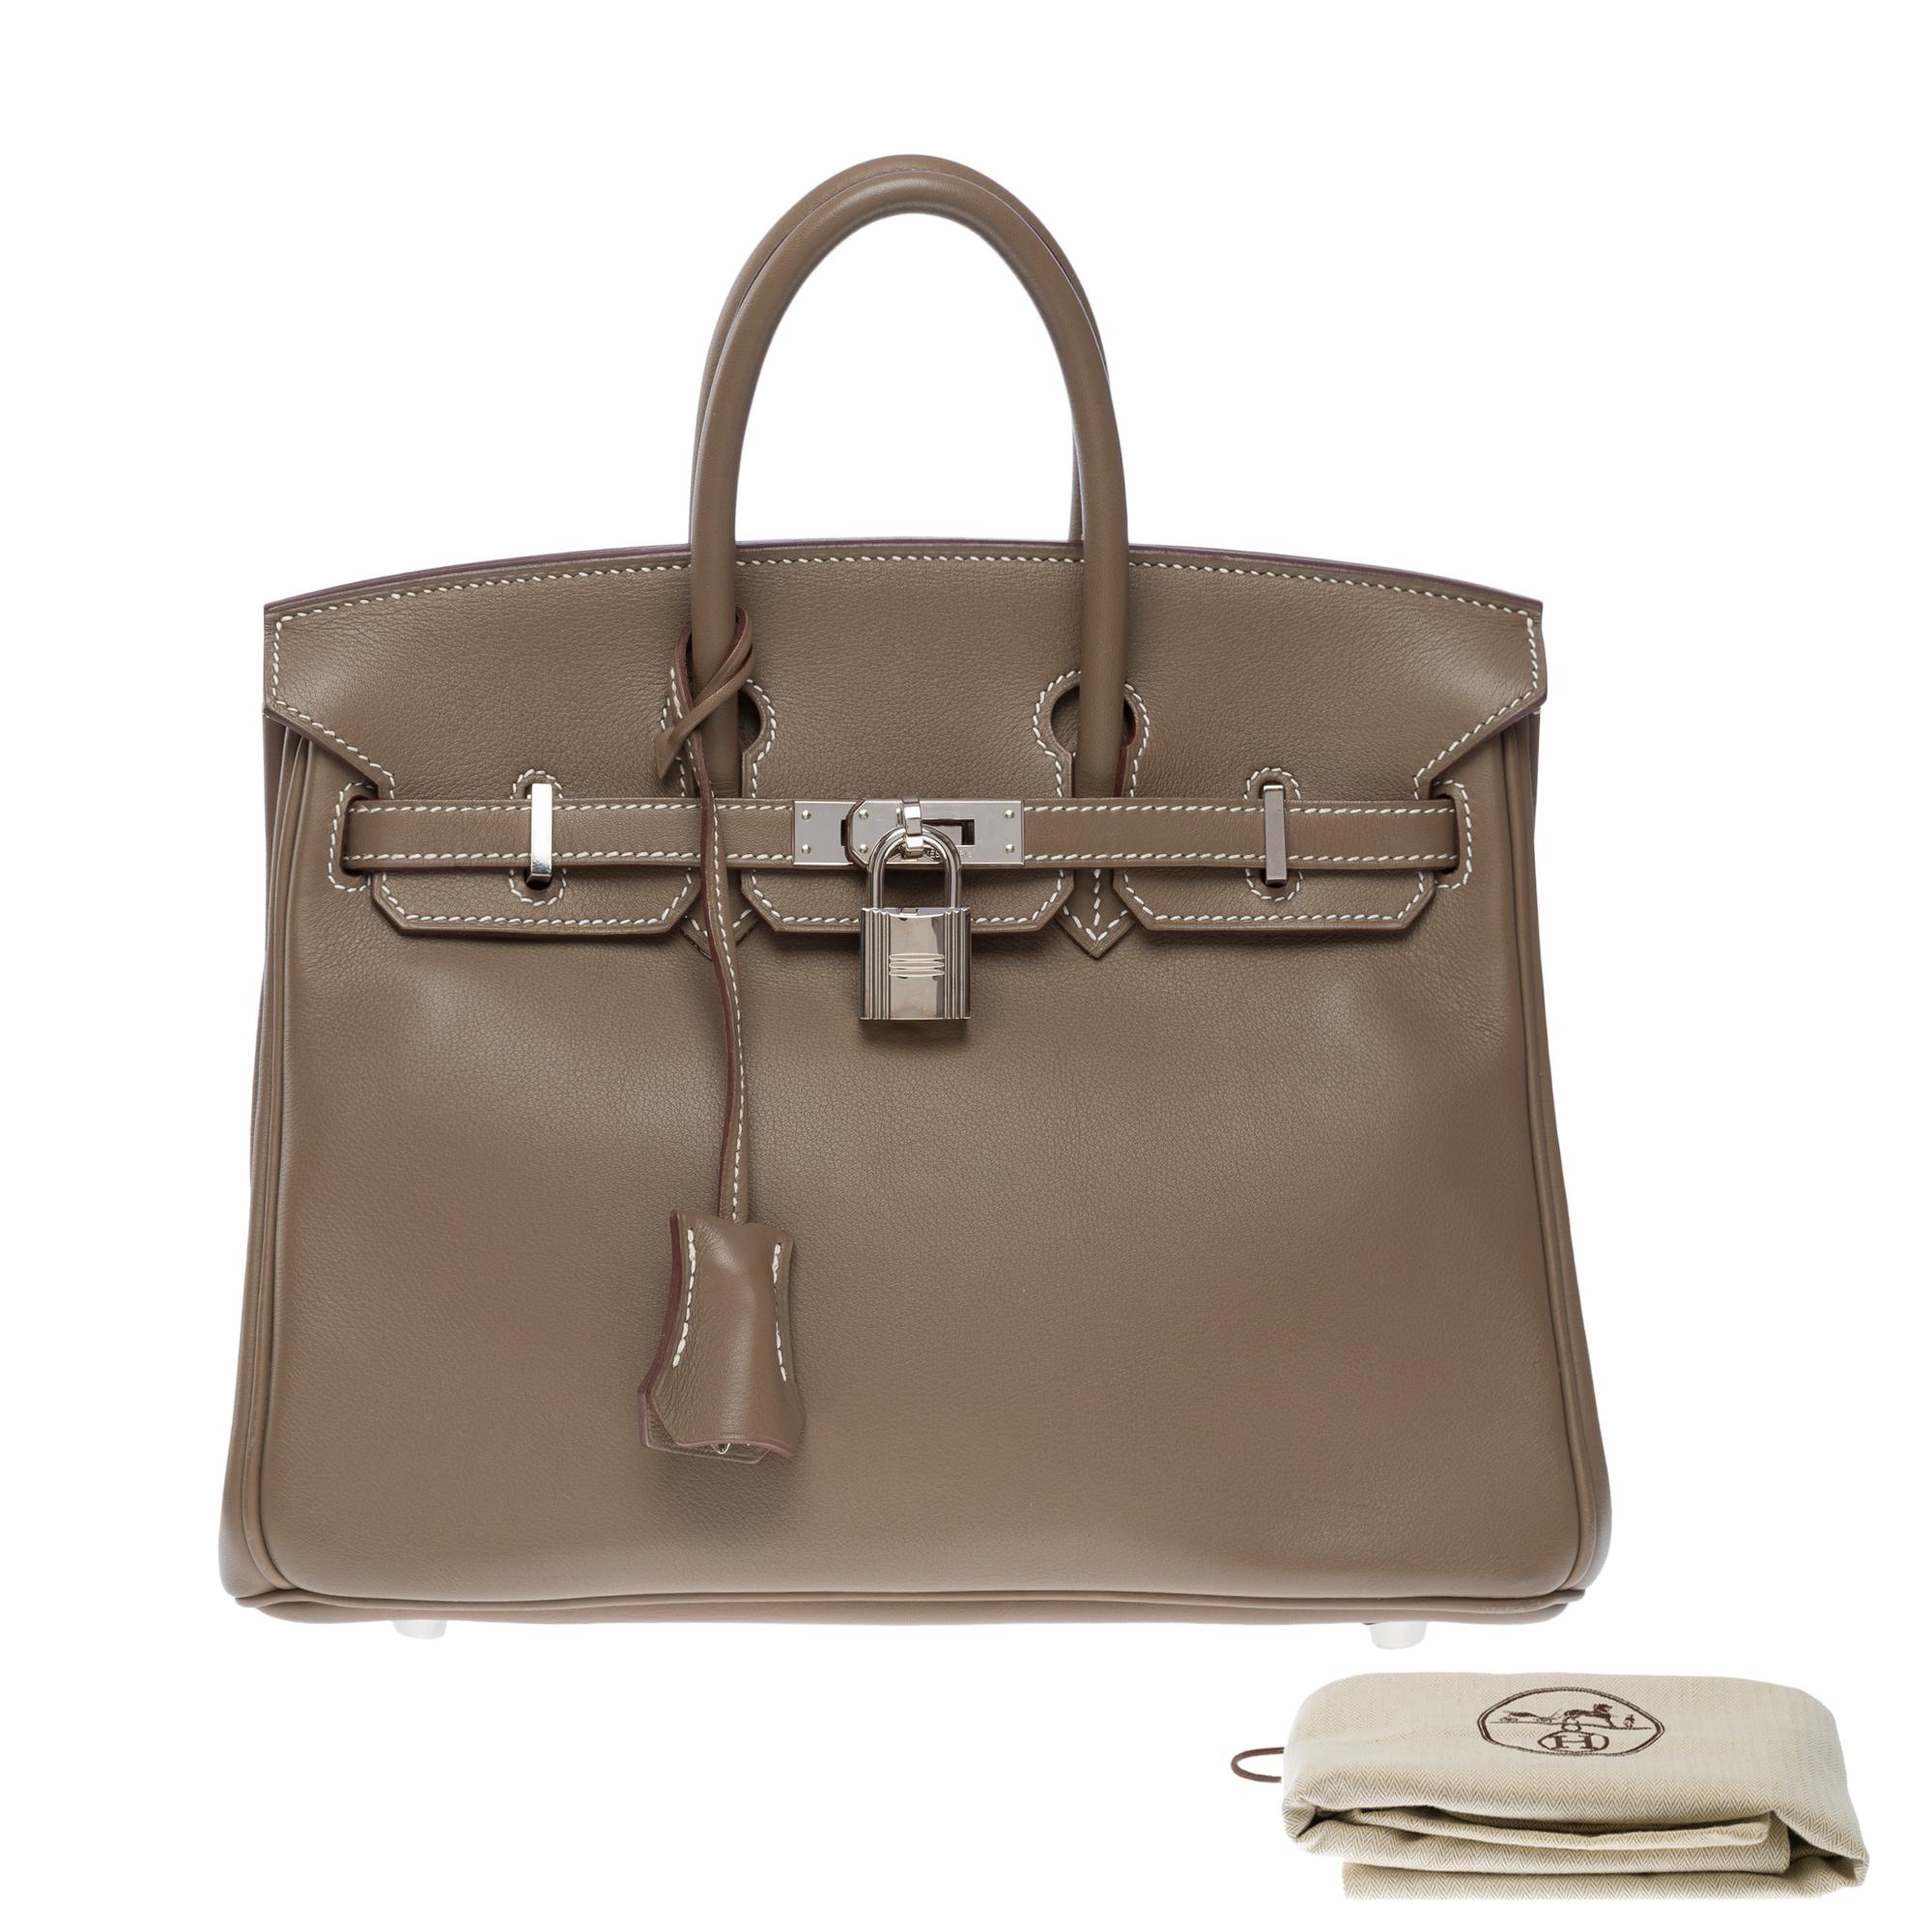 Amazing Hermès Birkin 25 in Etoupe swift calf leather, palladium silver metal trim , double handle in grey leather allowing a hand carry

Flap closure
Grey leather inner lining , a zippered pocket, a patch pocket
Signature: 